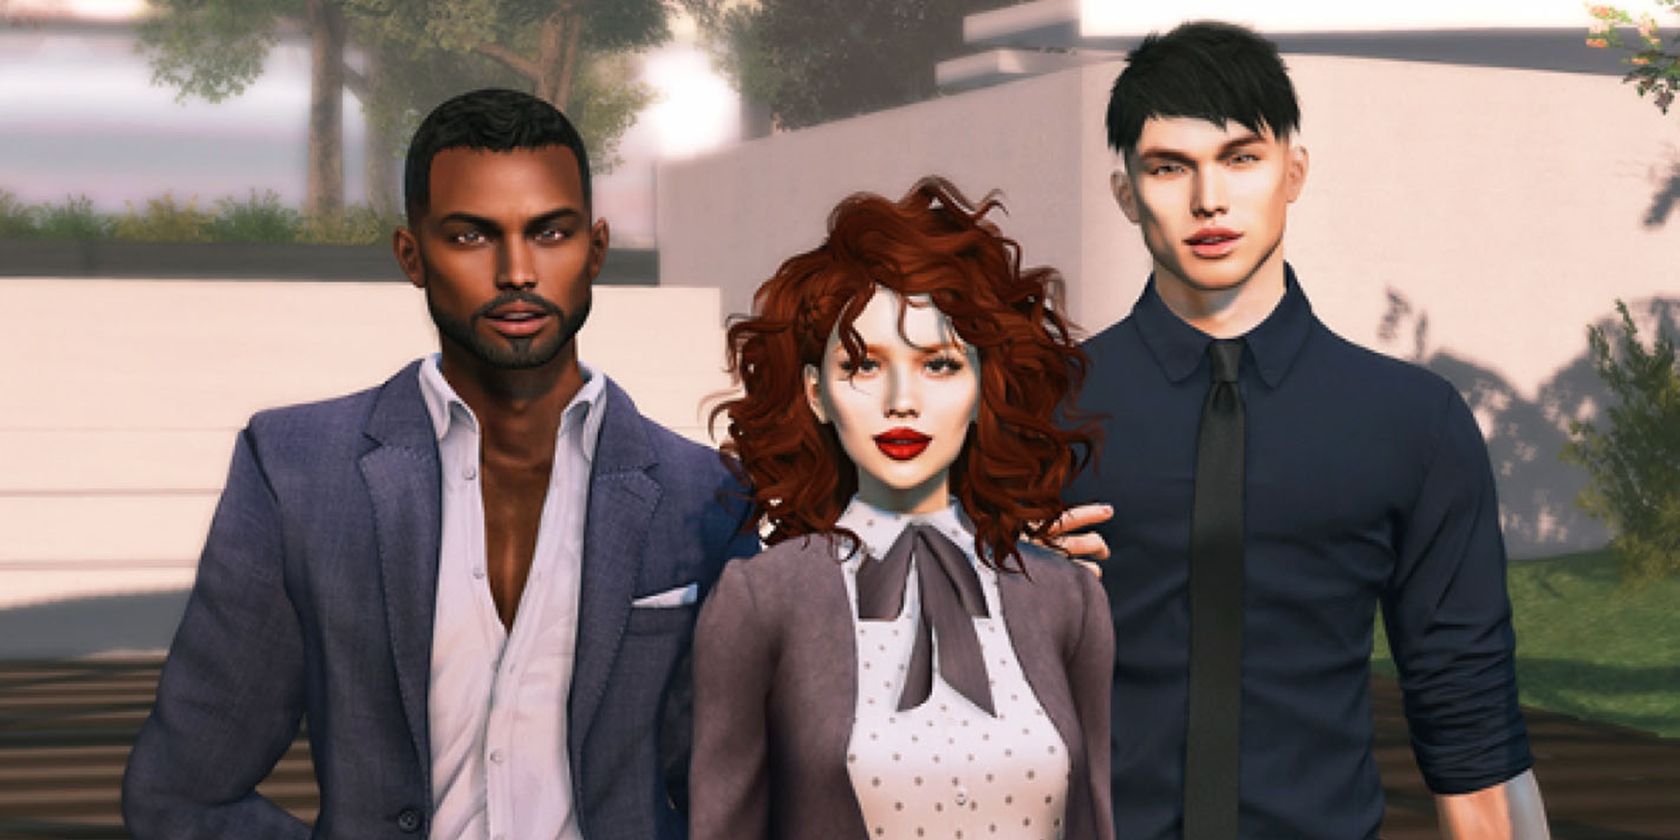 Illustration of Second life characters.